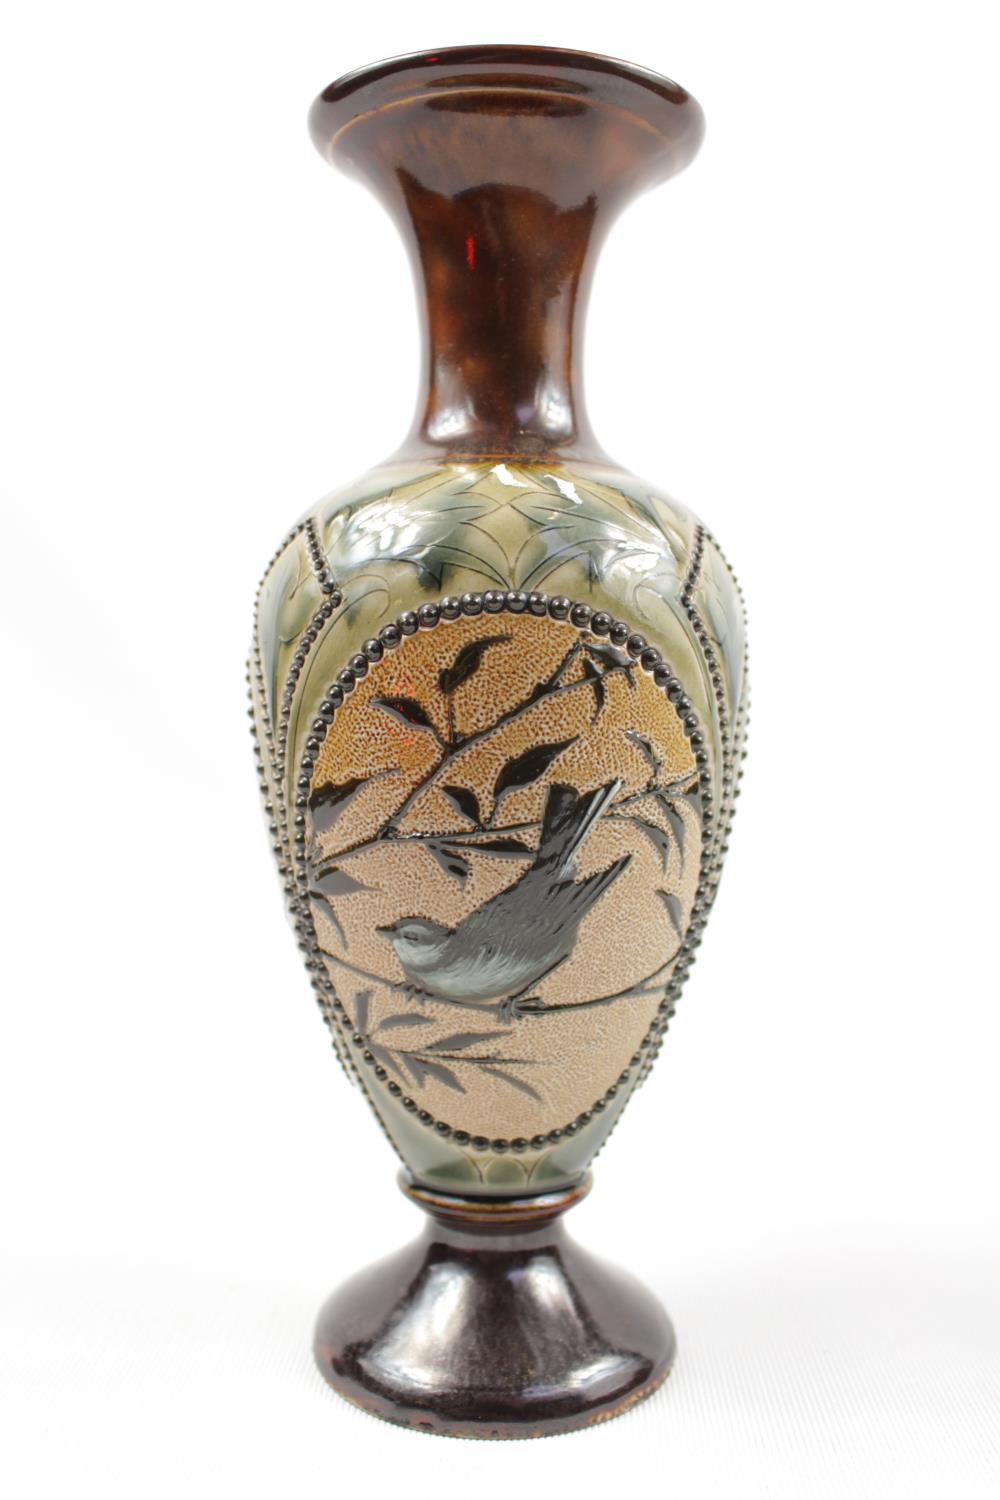 Florence Barlow Royal Doulton narrow vase with Bird decorated panel and foliate decoration, - Image 2 of 4